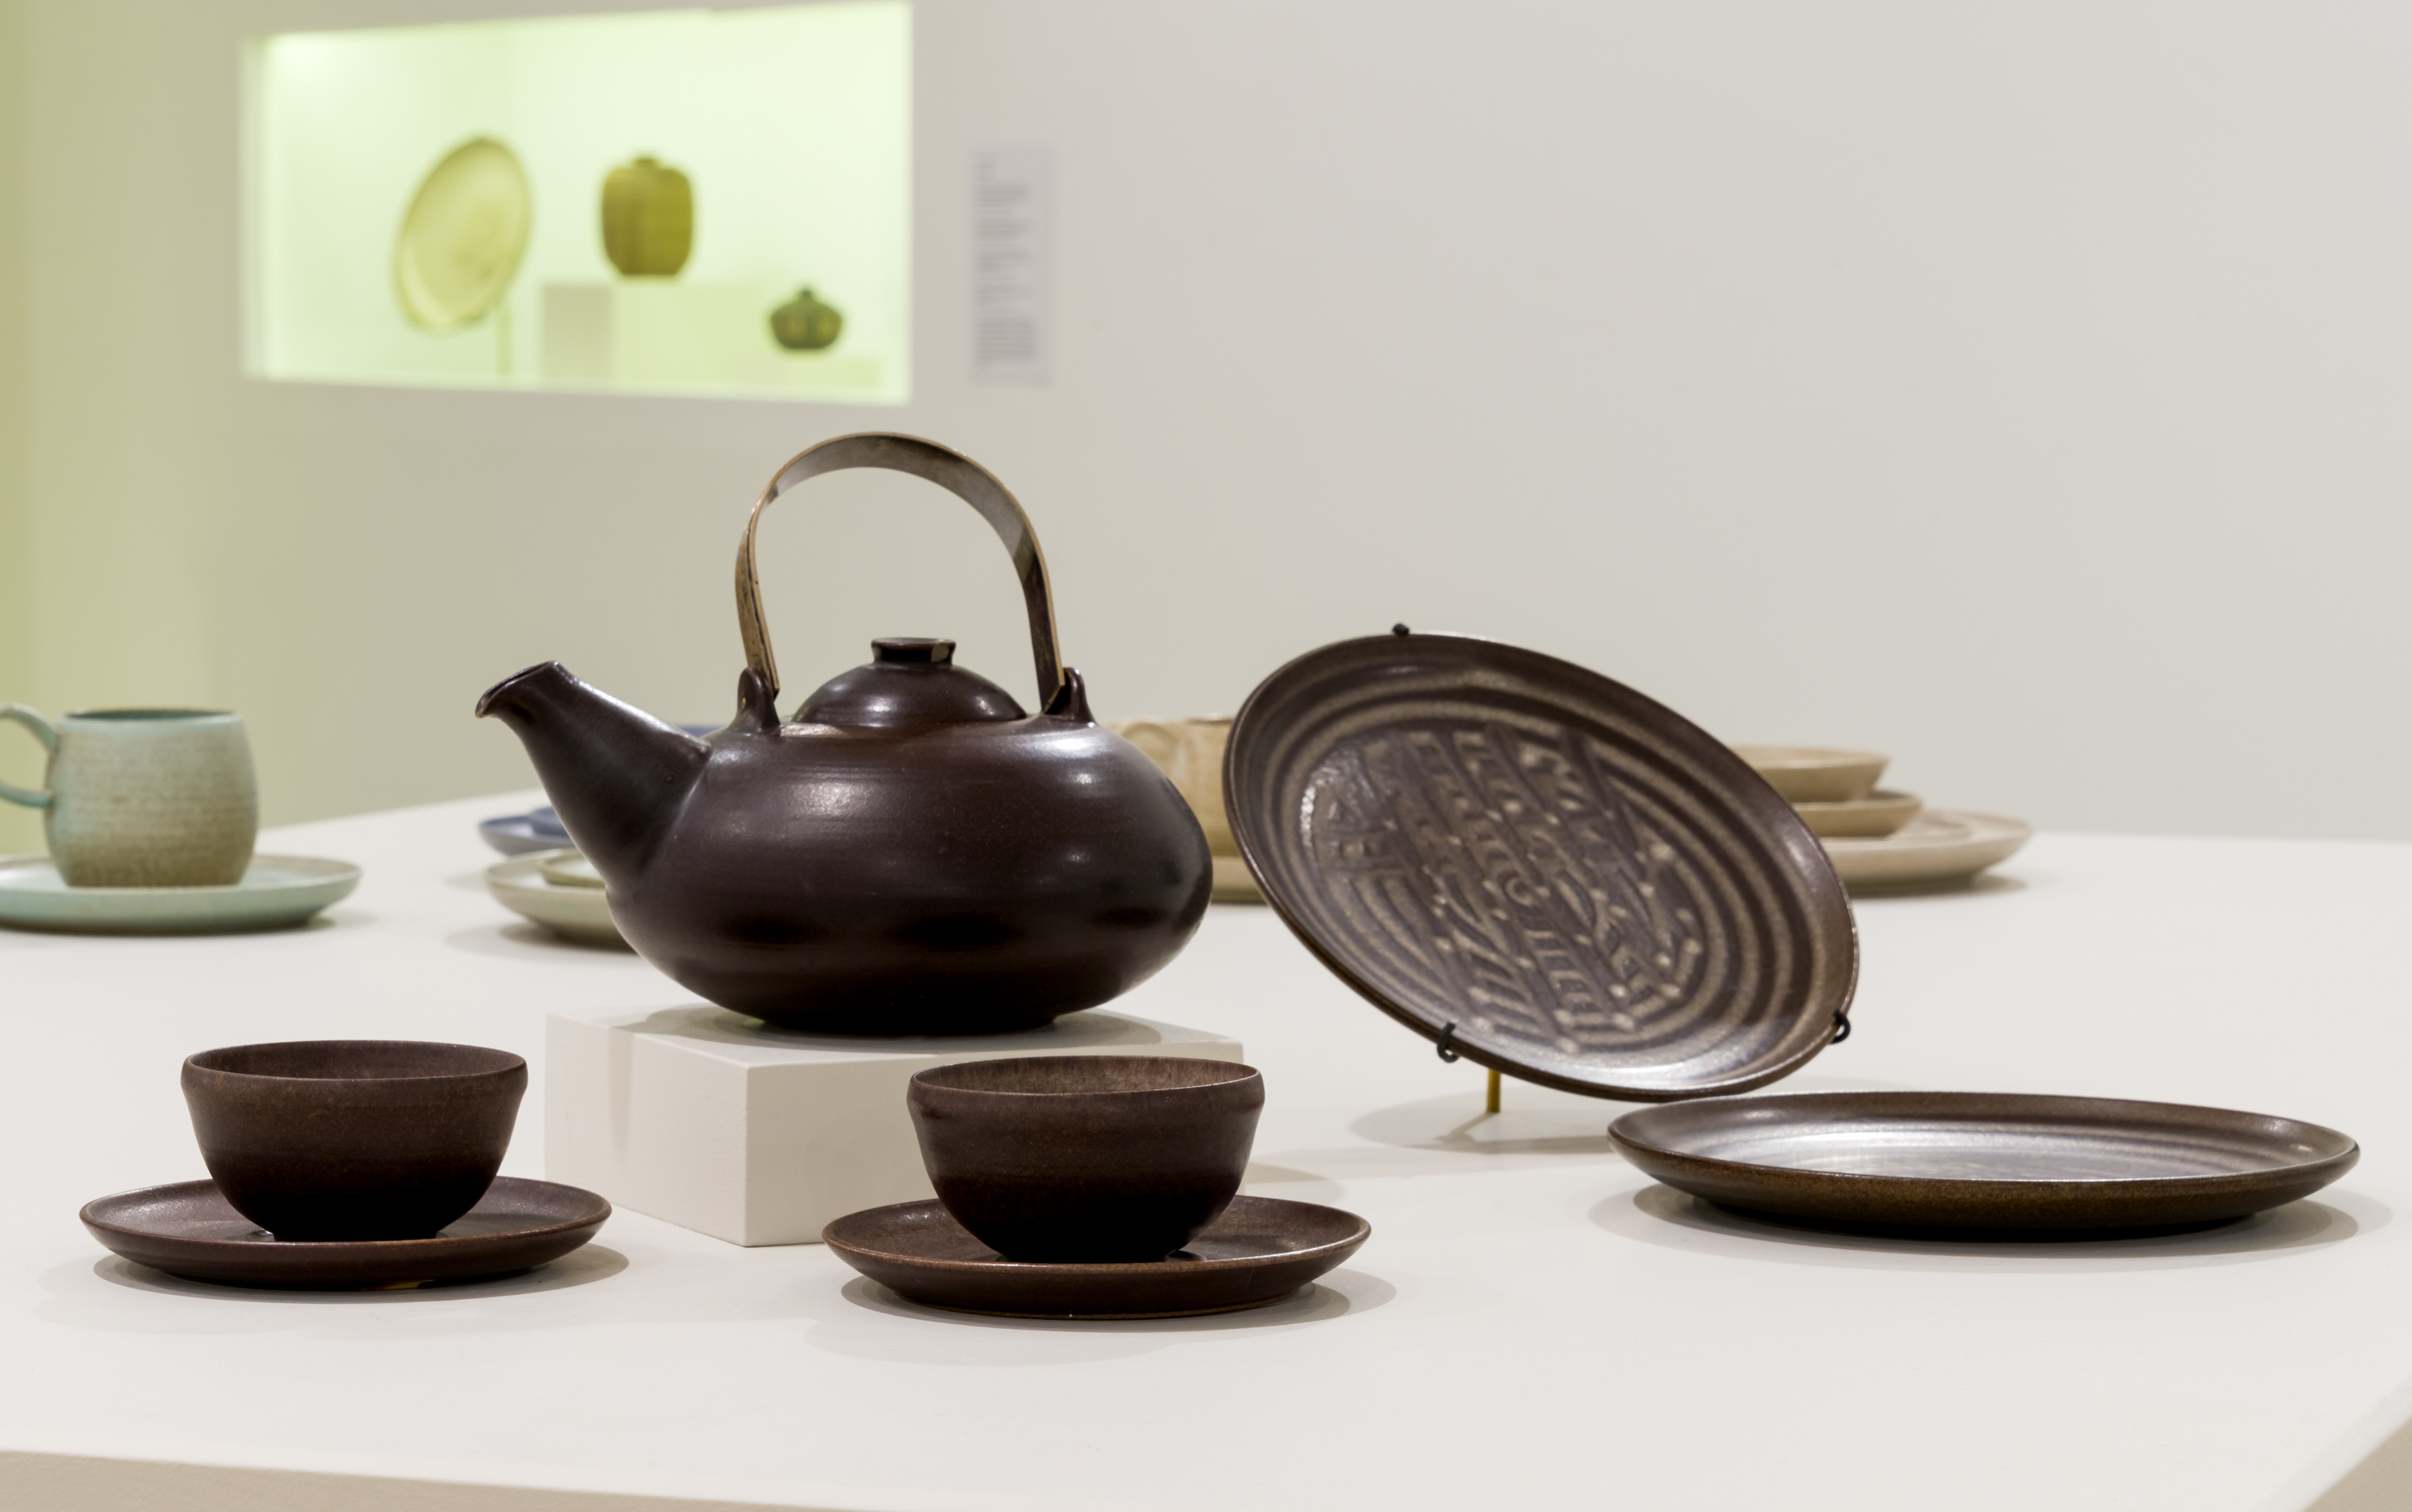 Photograph of a ceramic teapot, plates and mugs in a deep purple with other pieces visible in the background.